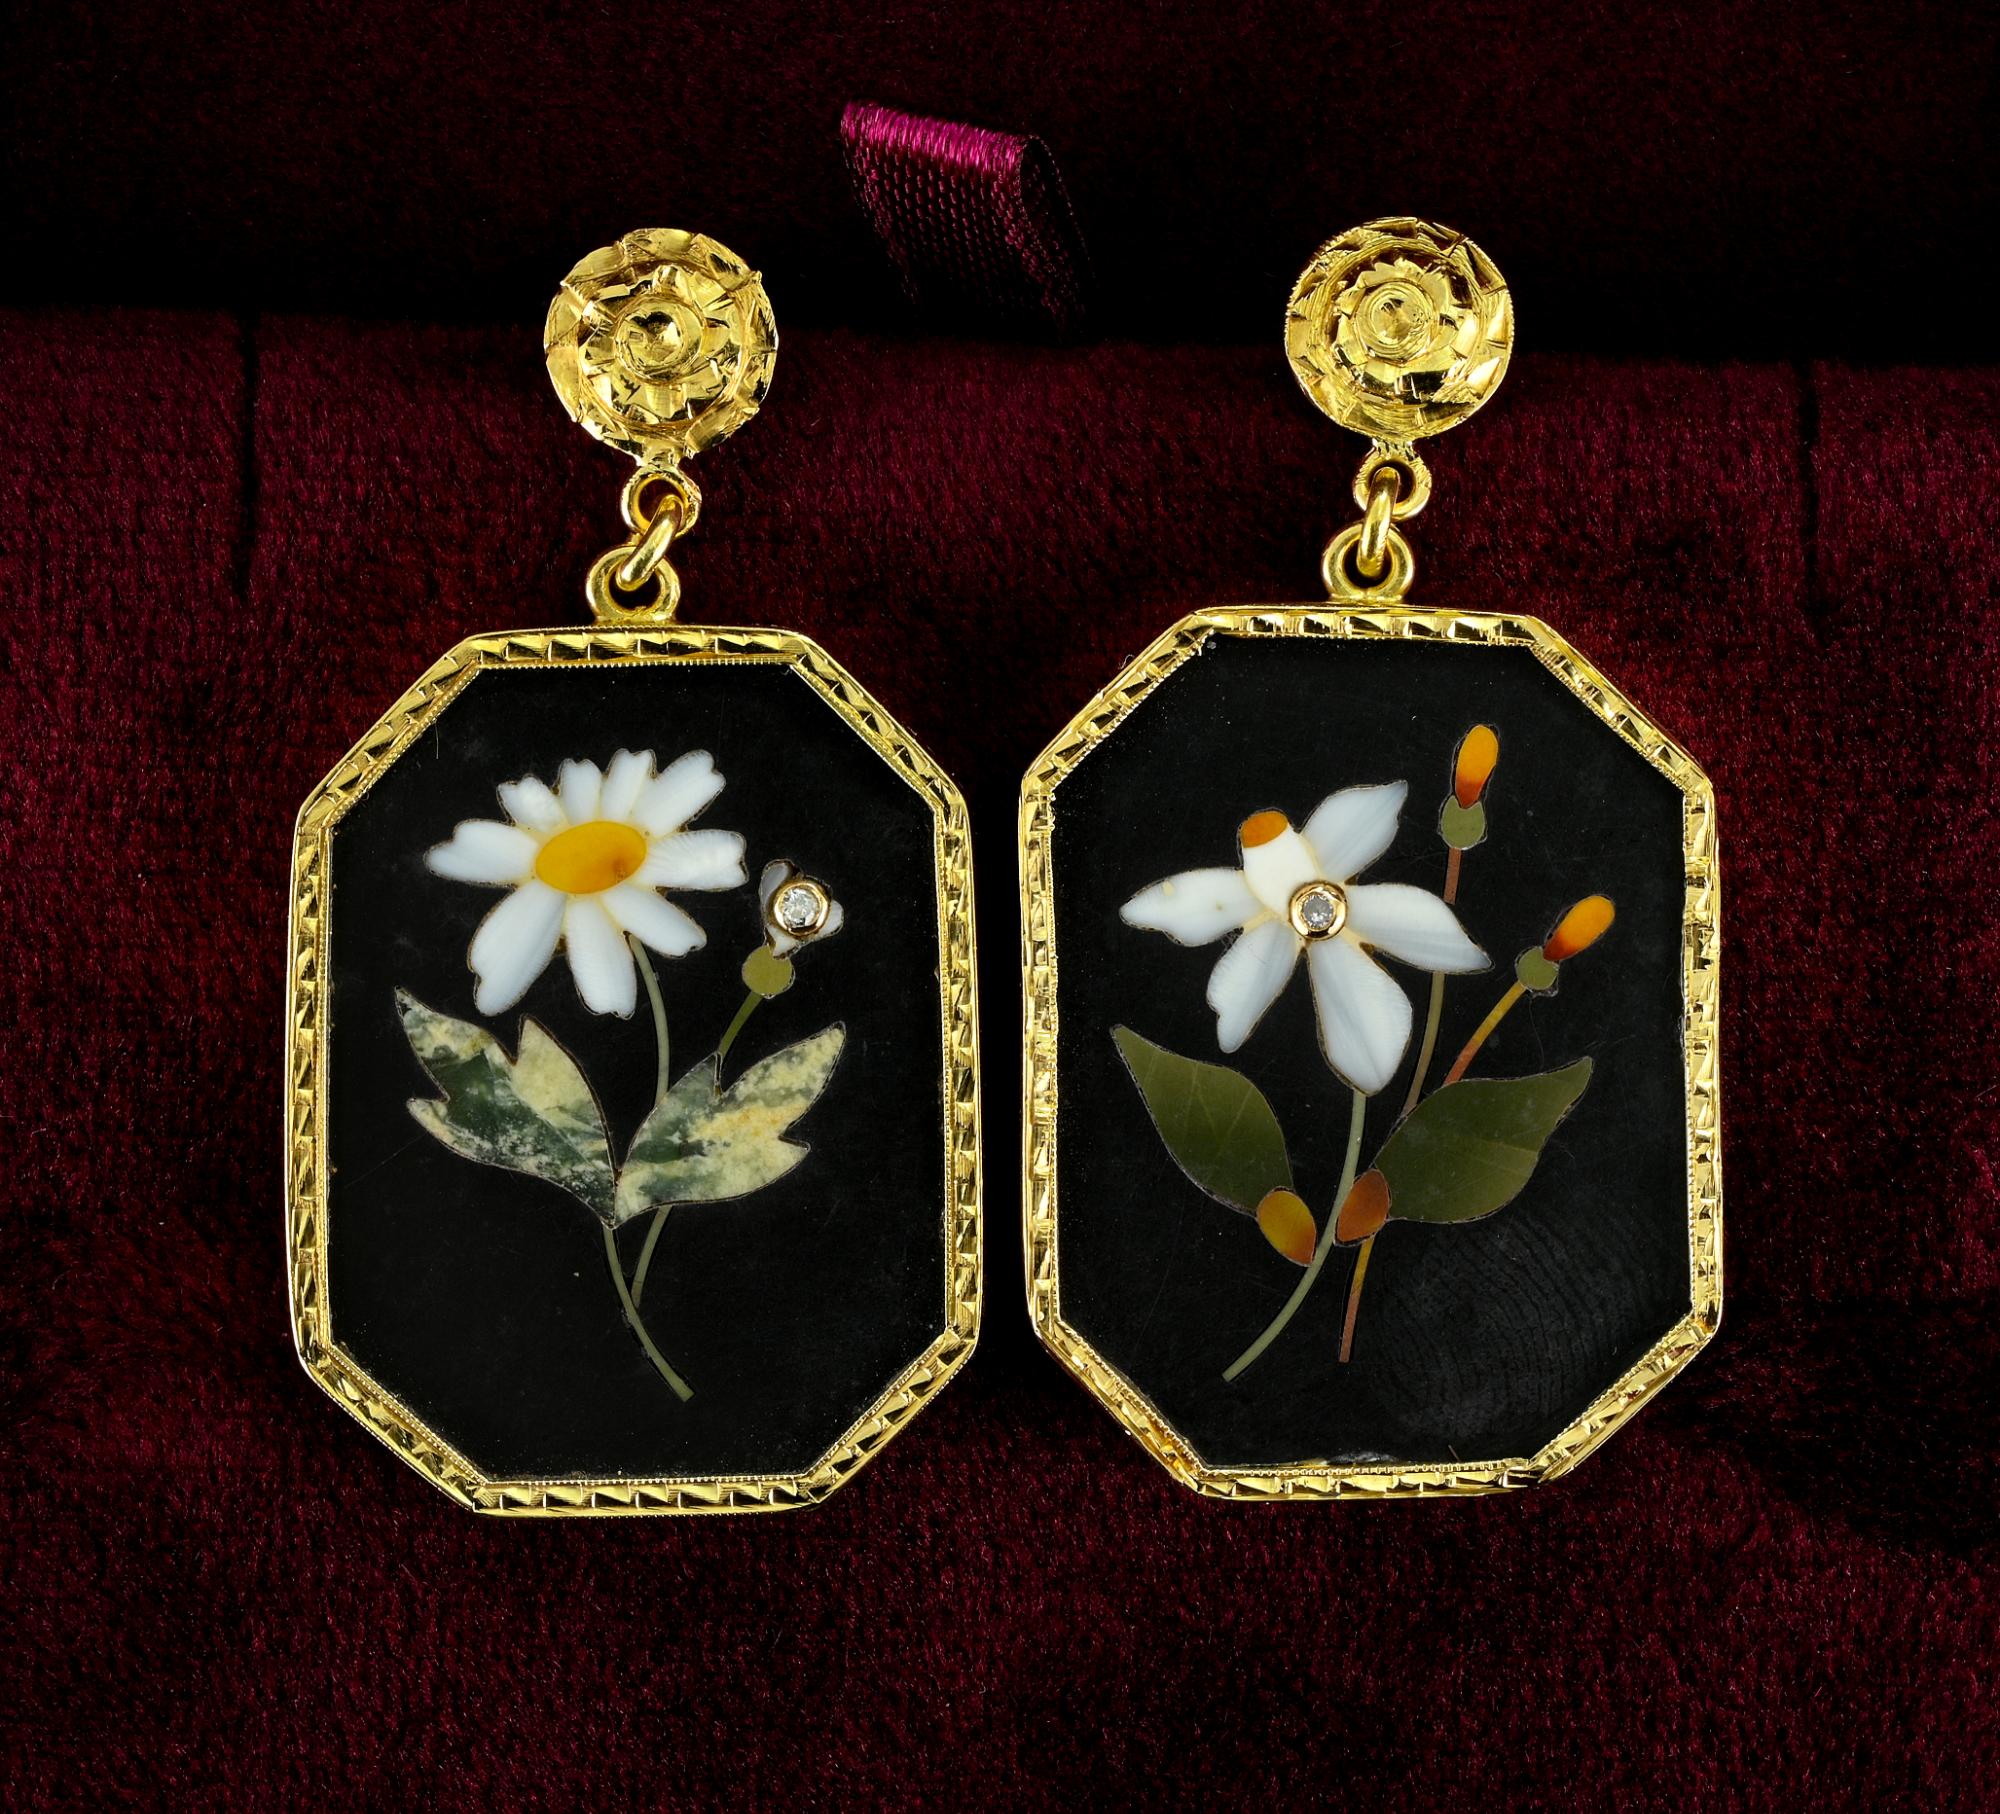 Pair of antique Florentine Pietra Dura earrings from the late Victorian period
Originated in Florence where the Pietra Dura Mosaic was specially curated under 'I Medici' giving life to a true fabric of wonders for any sort of decorative art